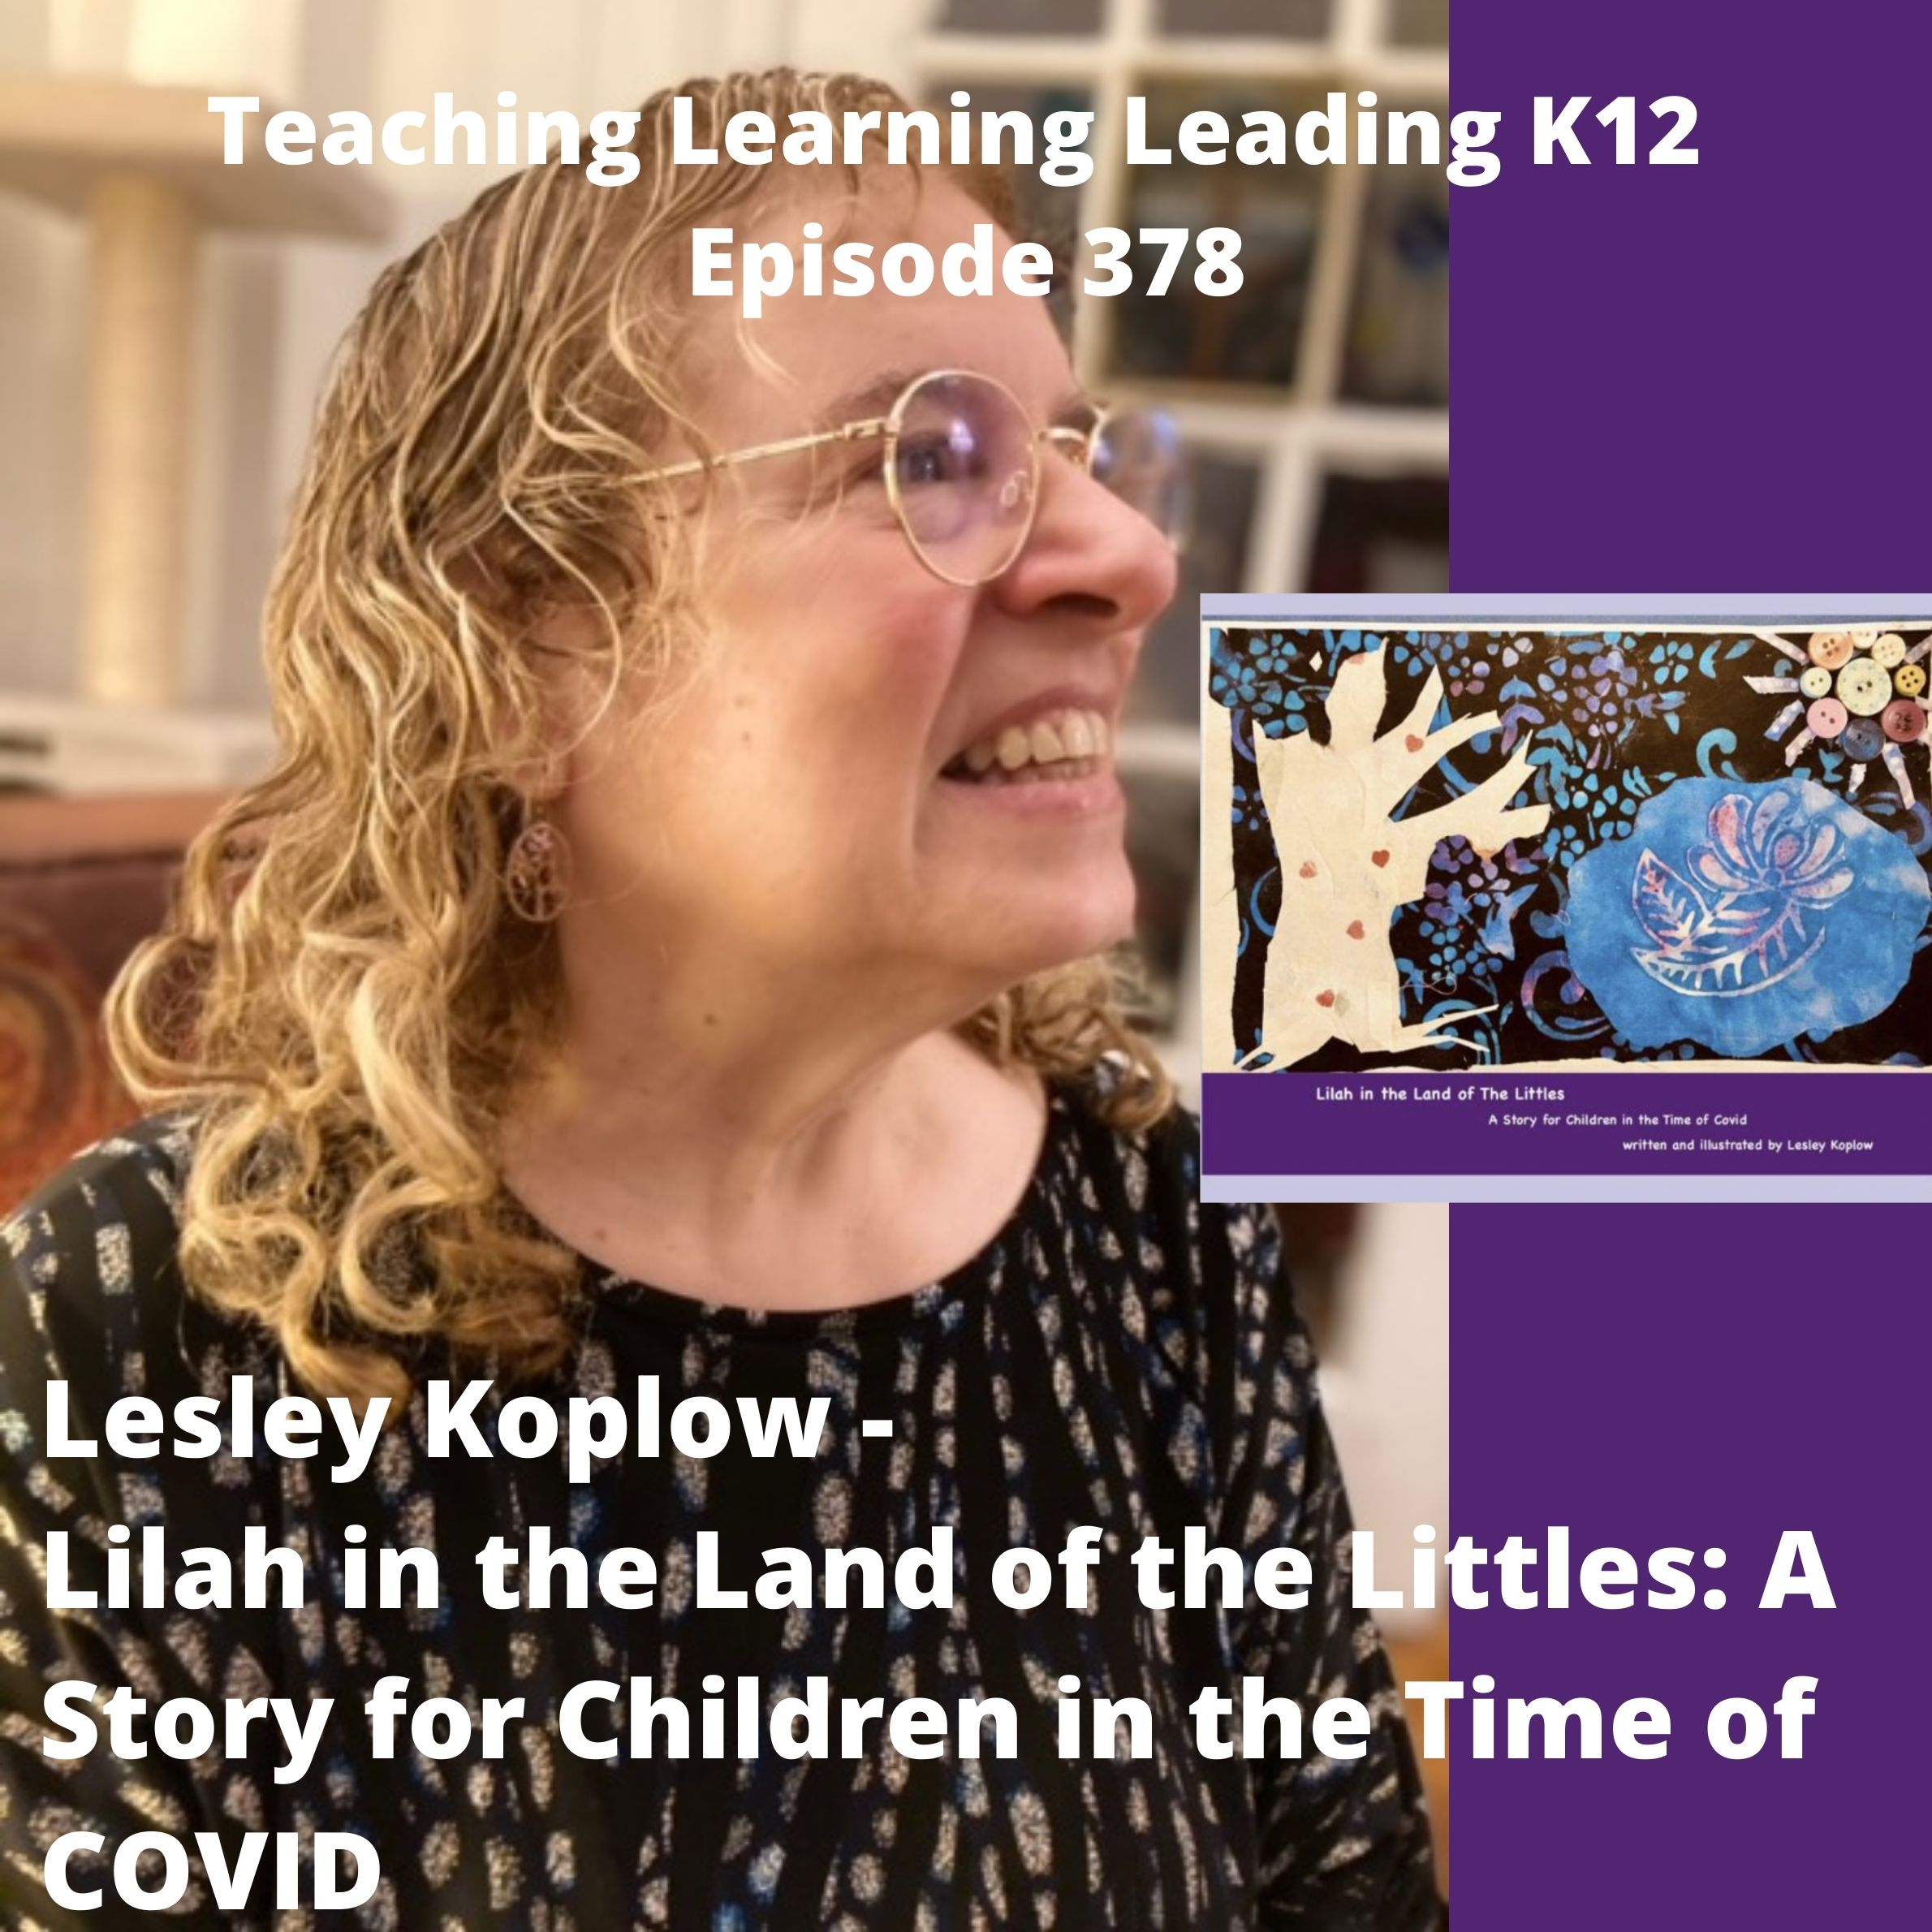 Lesley Koplow - Lilah in the Land of the Littles: A Story for Children in the Time of COVID - 378 Image